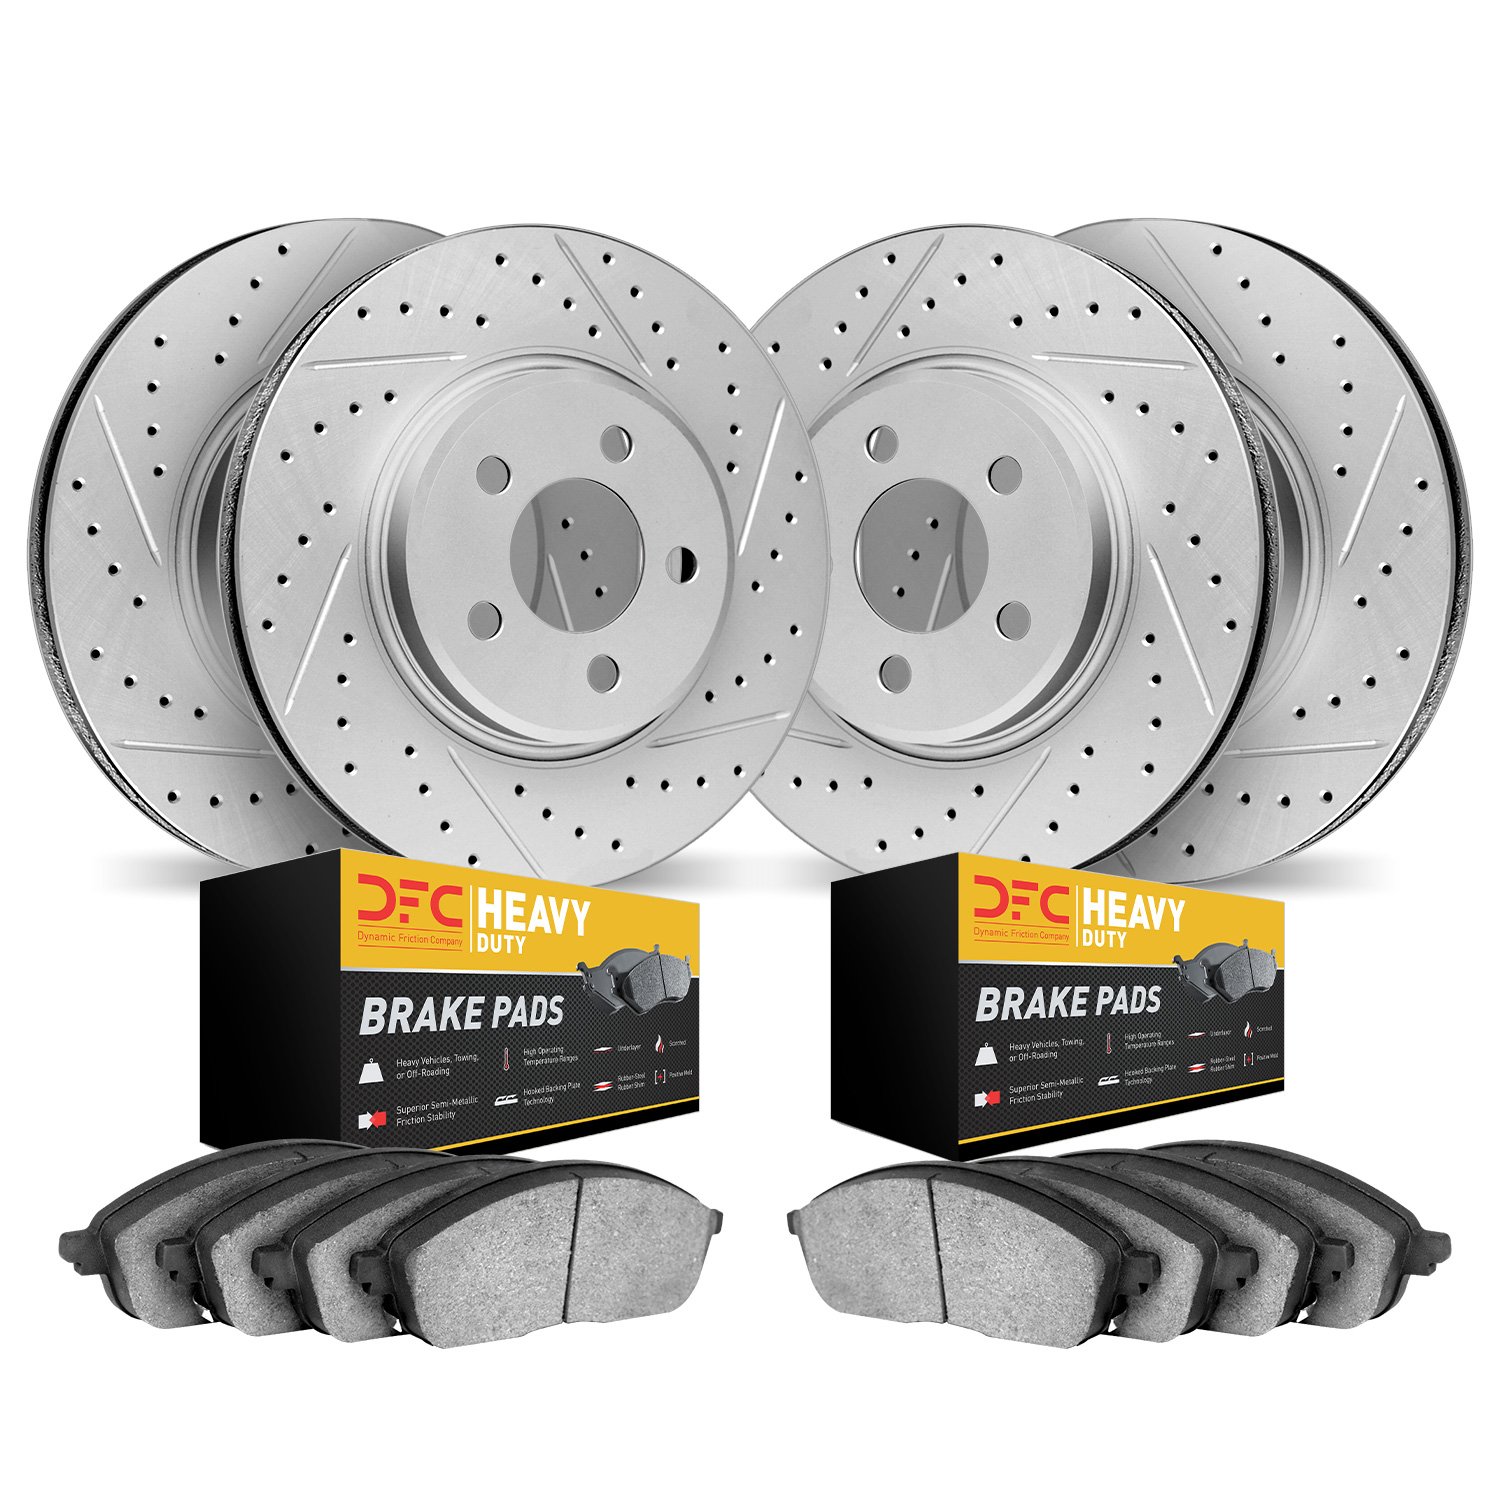 2204-42004 Geoperformance Drilled/Slotted Rotors w/Heavy-Duty Pads Kit, Fits Select Mopar, Position: Front and Rear